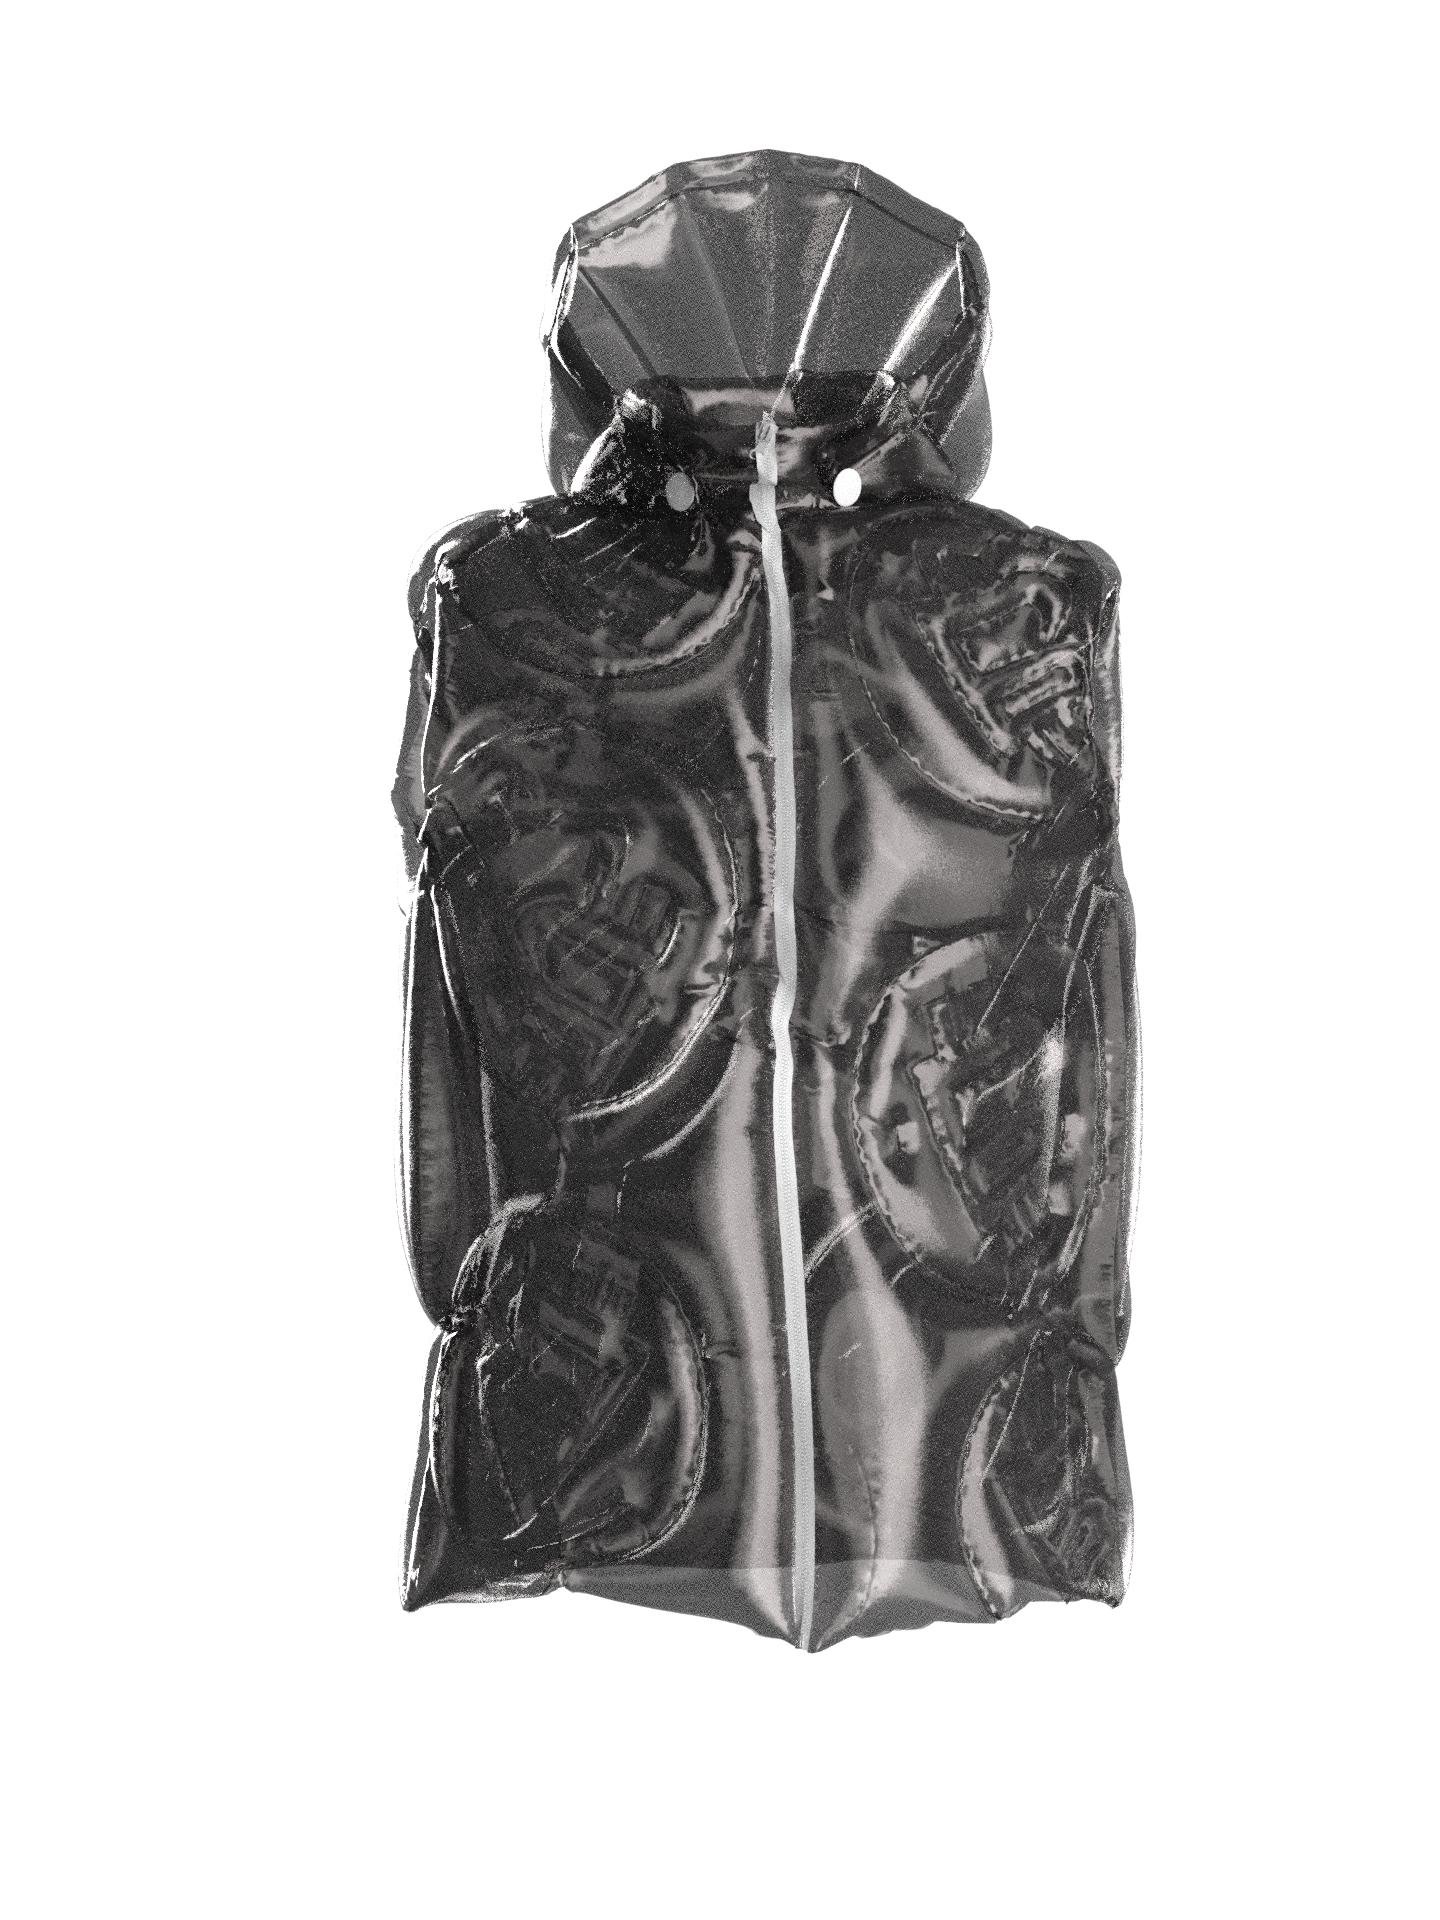 GlassCeiling vest by LUCII